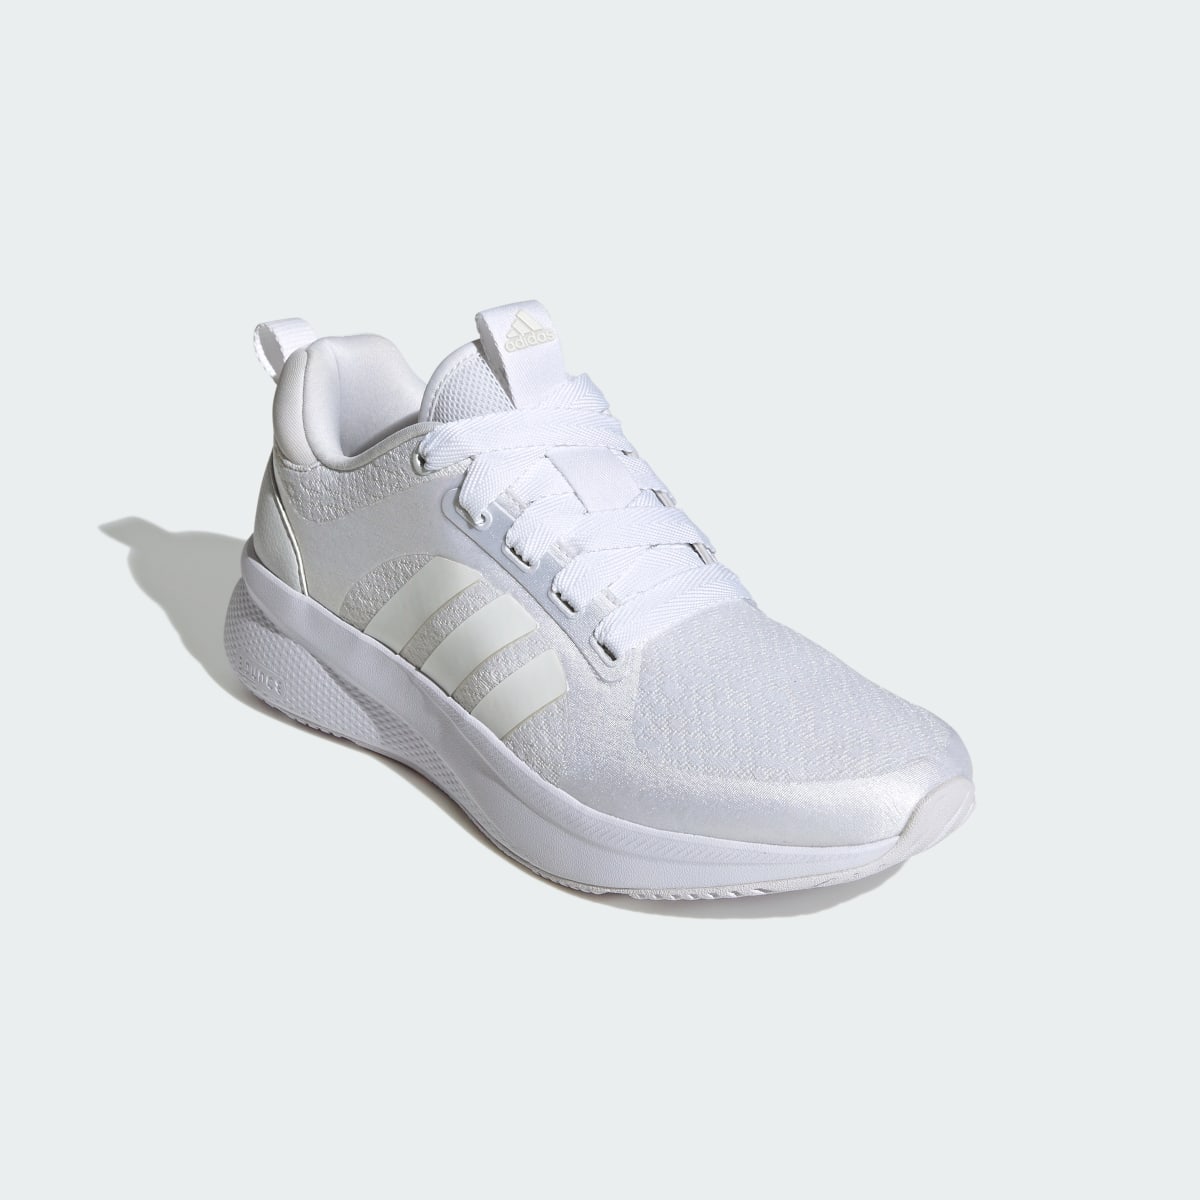 Adidas Edge Lux 6.0 Shoes. 5